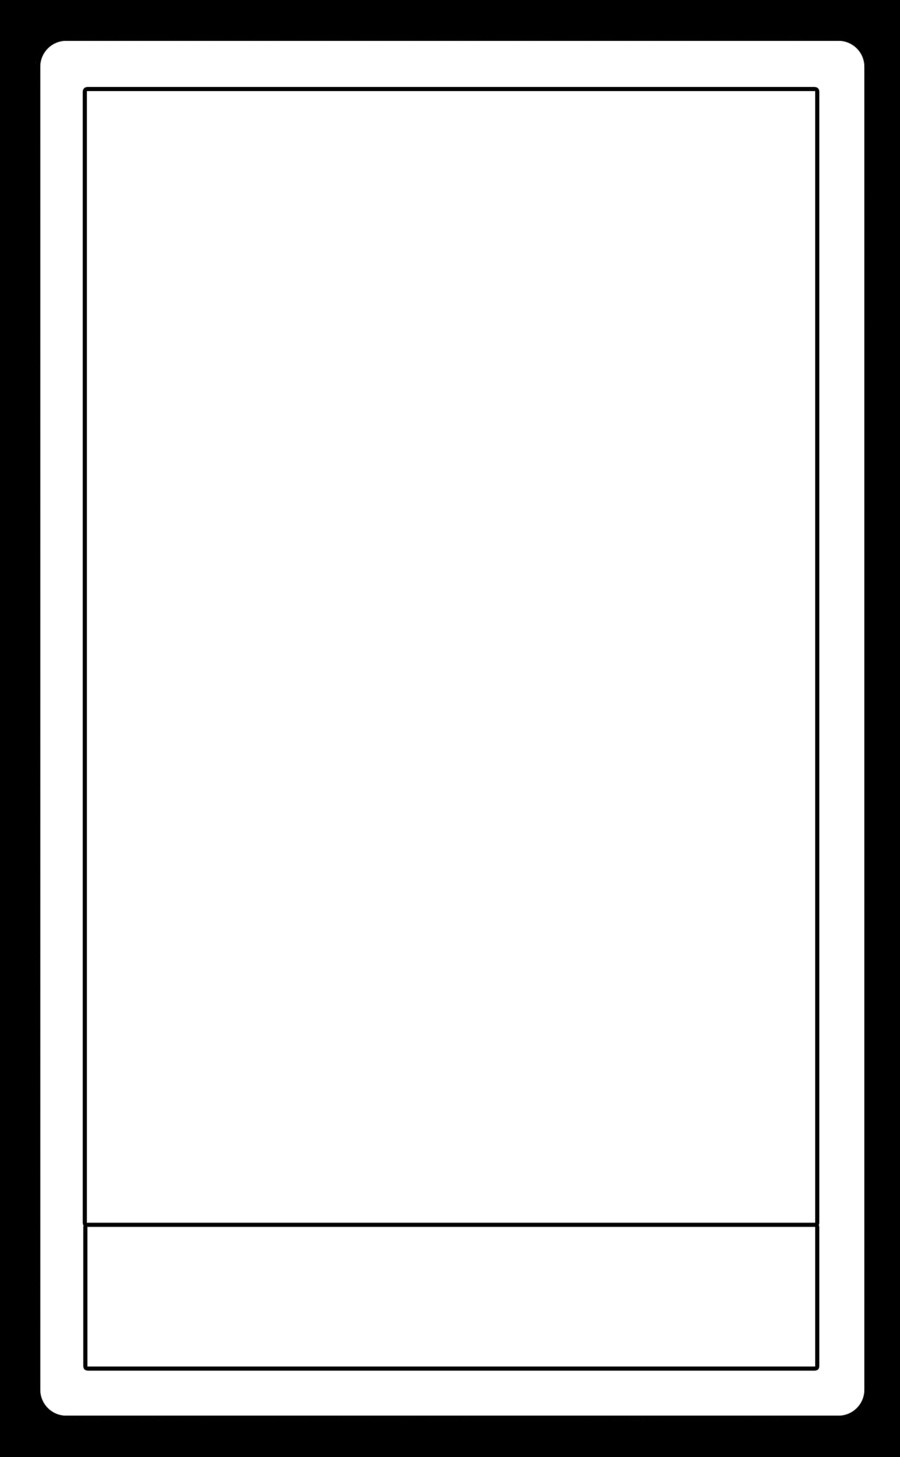 tarot card template by Arianod on DeviantArt